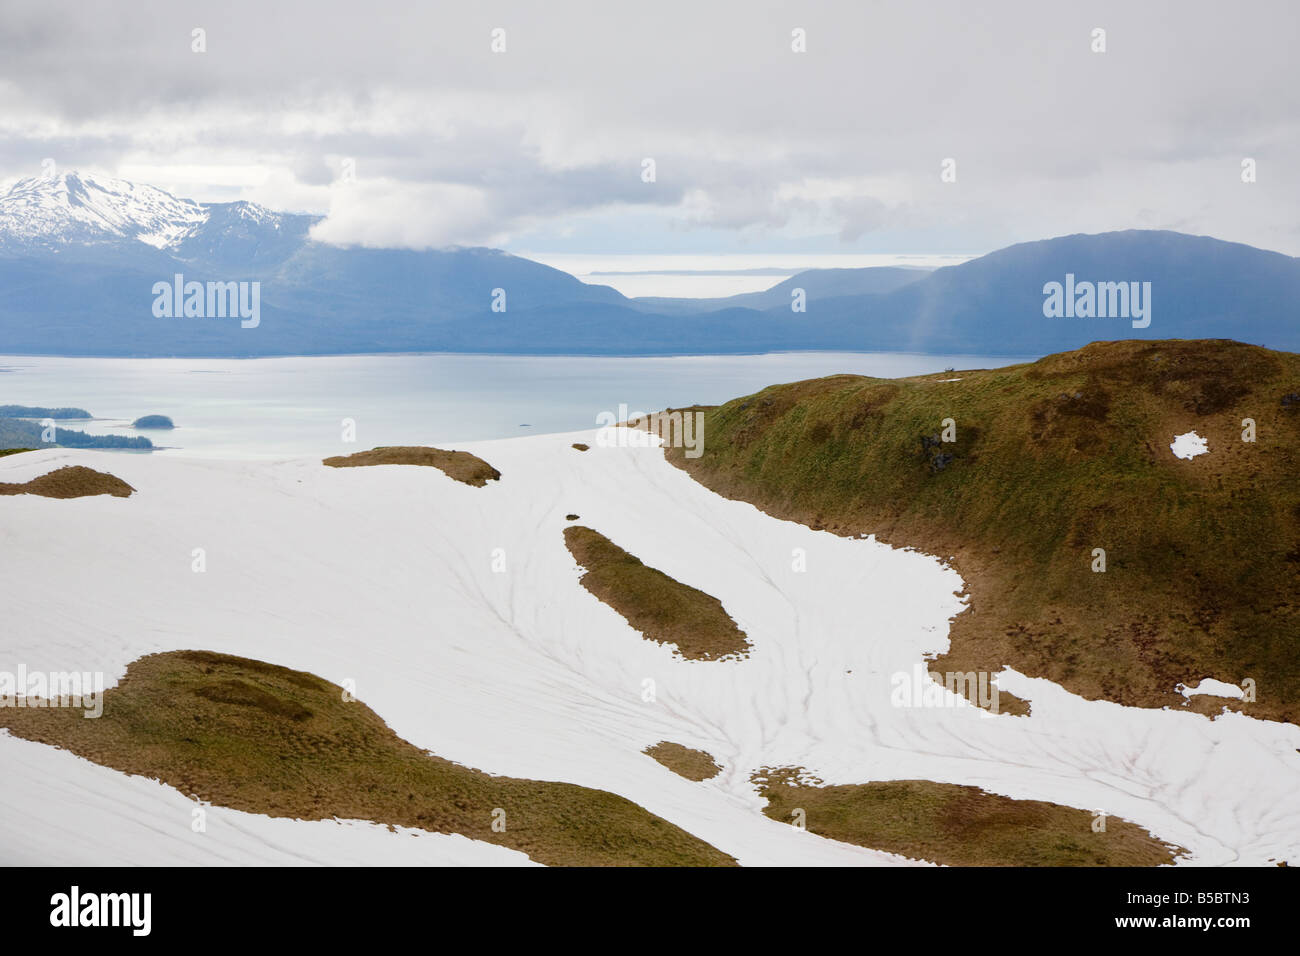 Aerial view of snow capped mountains above Juneau, Alaska Stock Photo